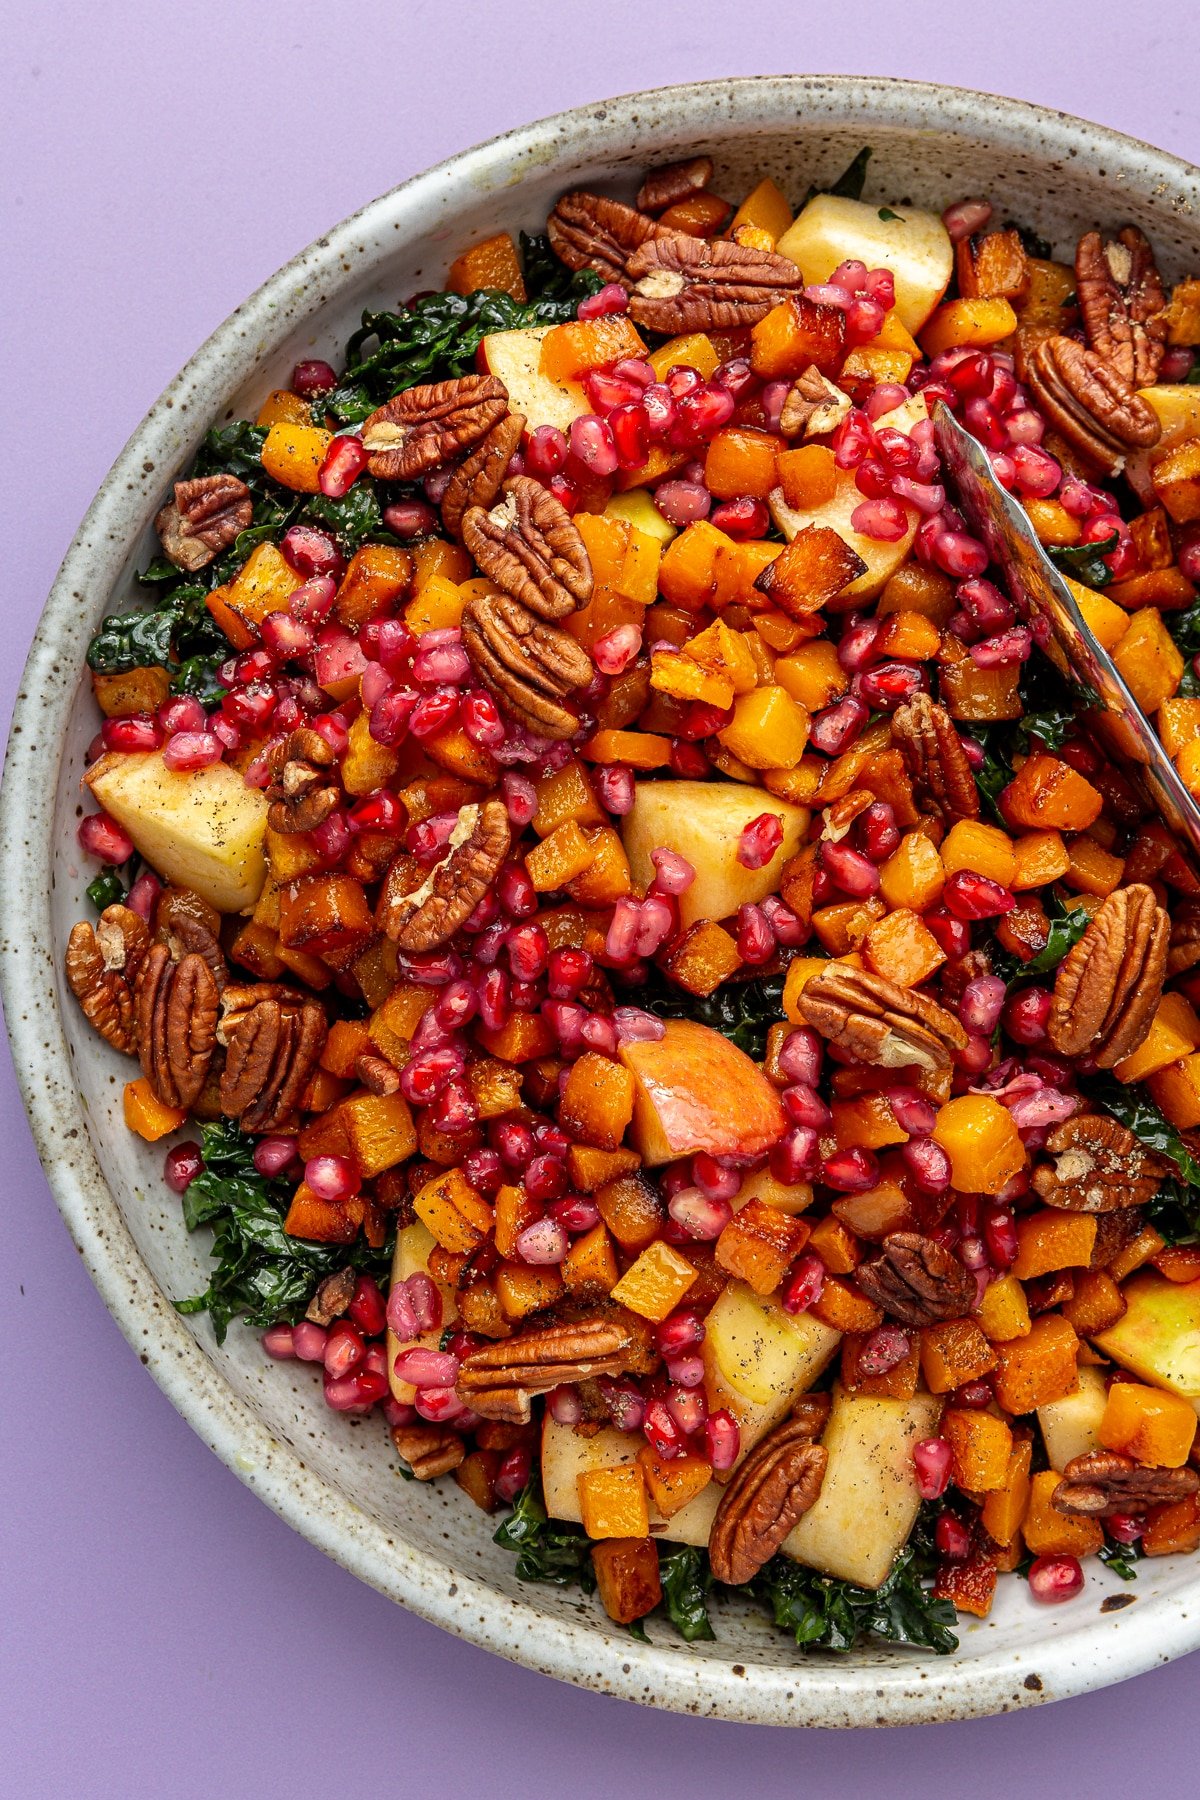 Fall Harvest Salad with Roasted Butternut Squash - Fed & Fit